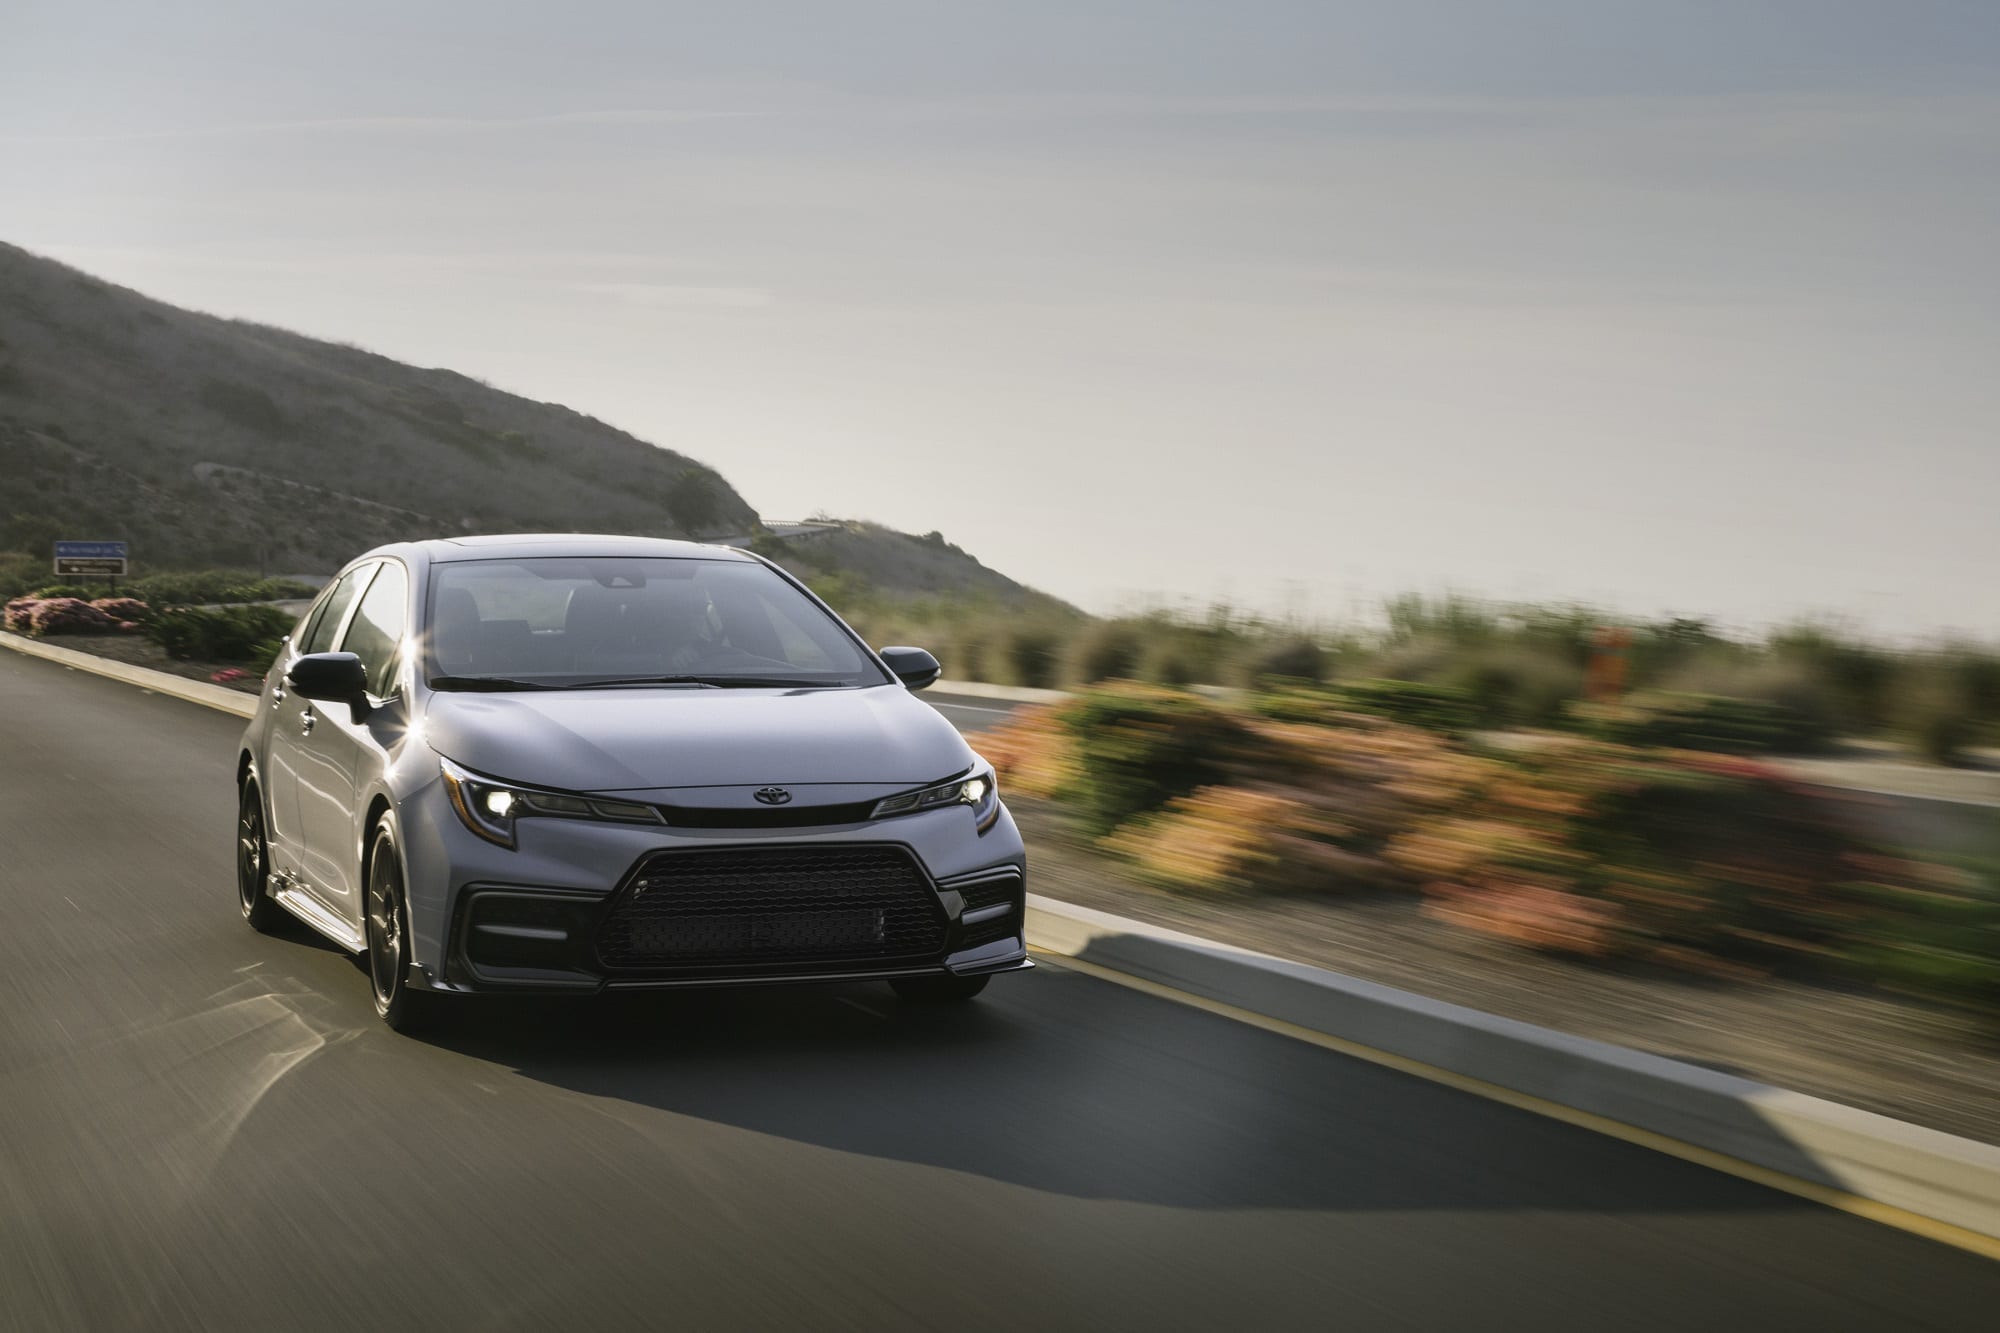 2021 Toyota Corolla: Affordable, Compact, and Loaded with Features